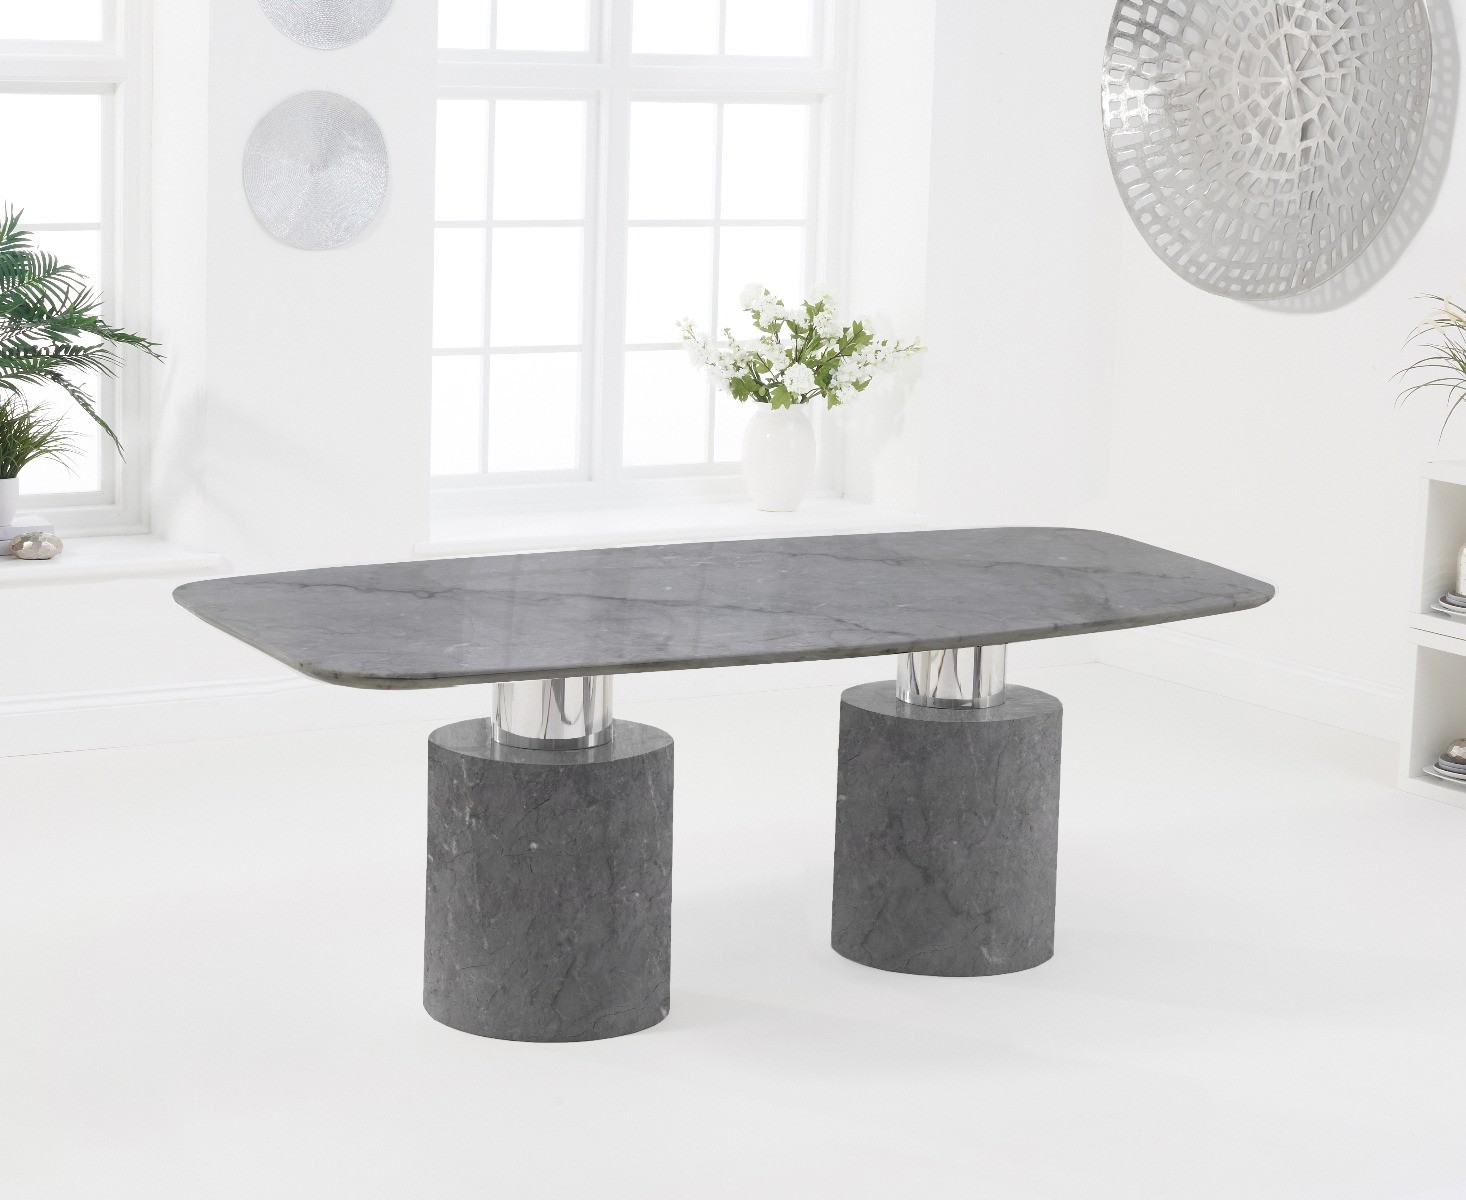 Photo 3 of Antonio 180cm grey marble dining table with 4 grey lorenzo chairs